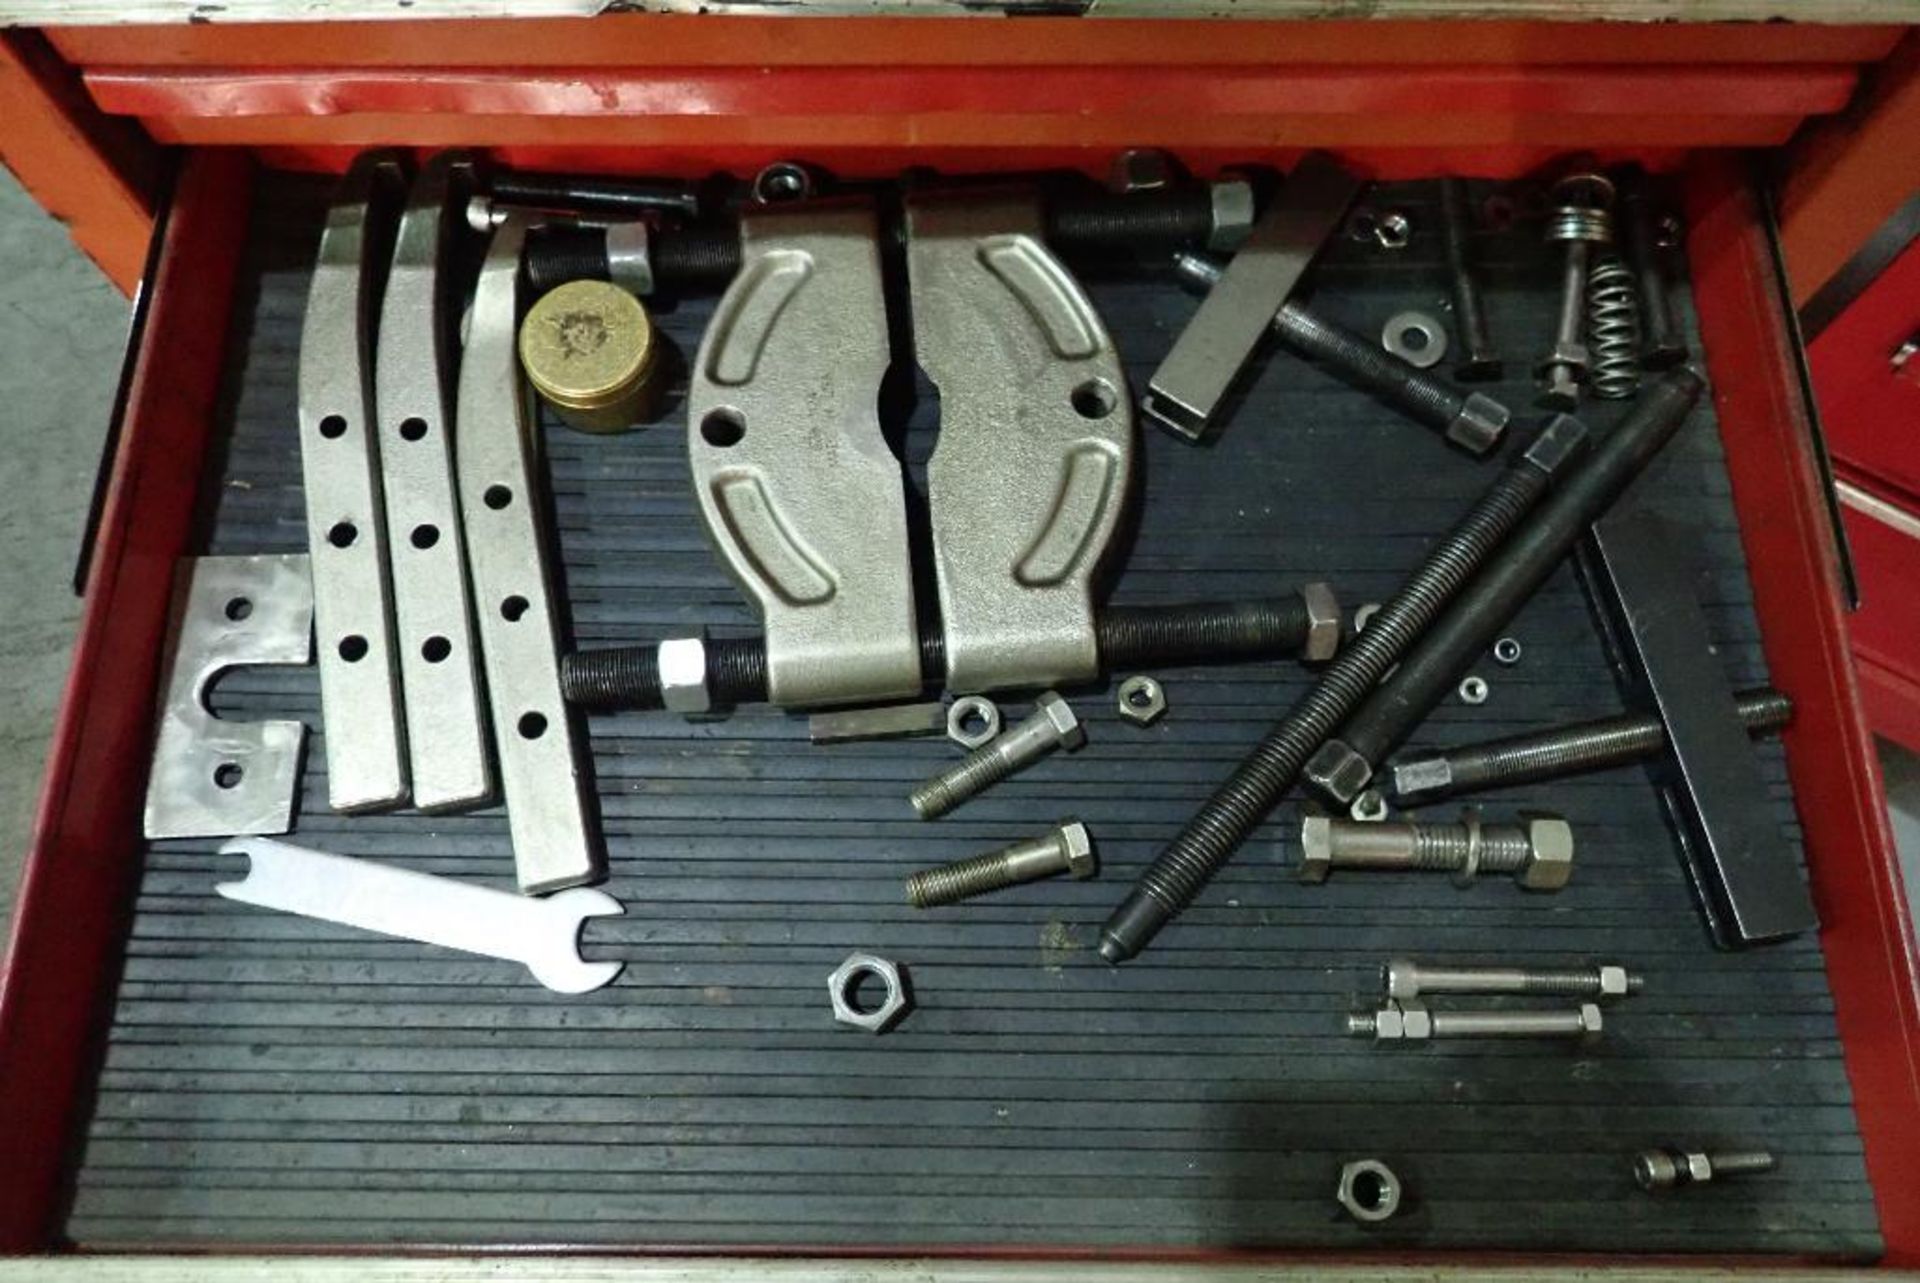 (2) tool chests with contents, wrenches, sockets, drill bits screw drivers, air tools, hammers, plie - Image 28 of 31